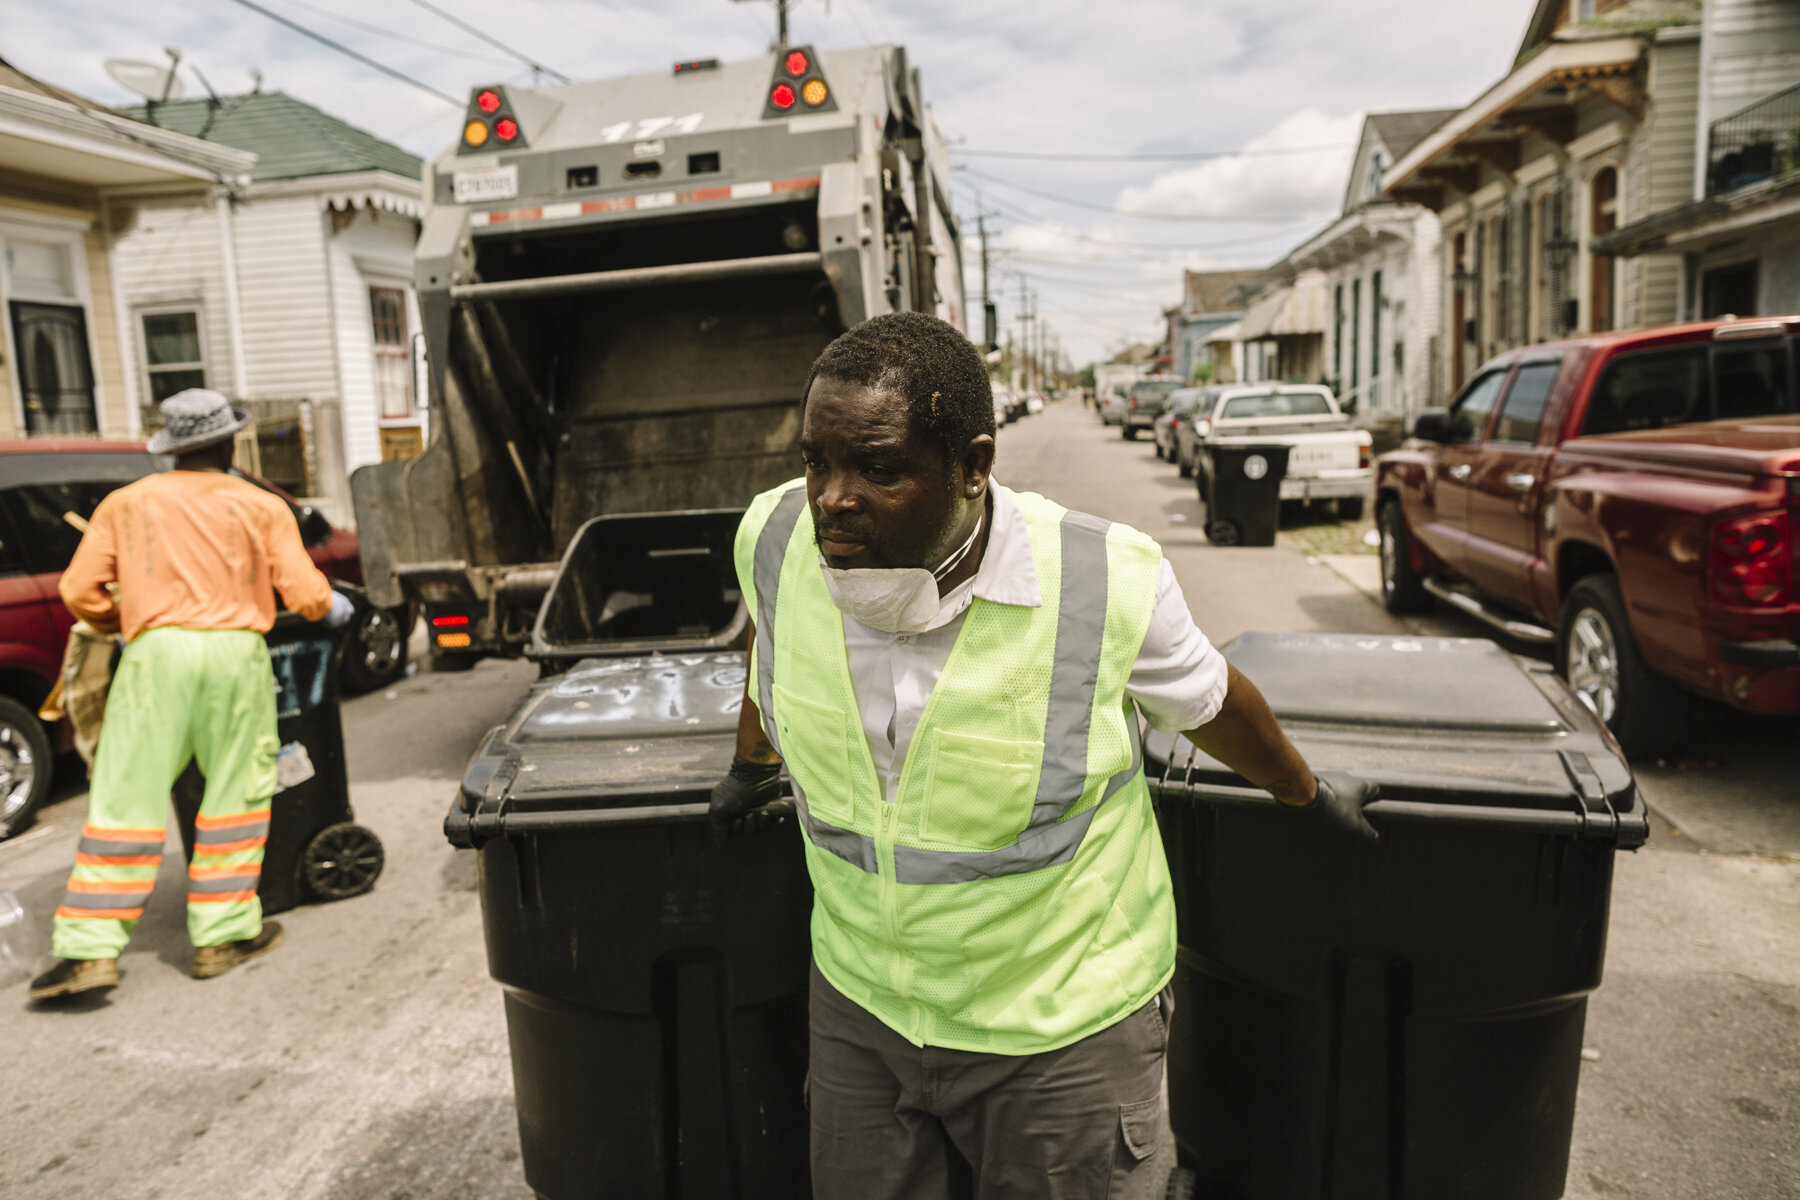  New Orleans, LA - March 24, 2020 - Isaac Brooks works with fellow employees to load residential trash into the back of a Metro Services Group garbage truck. The company has begun furnishing extra protective equipment to their employees in an effort 